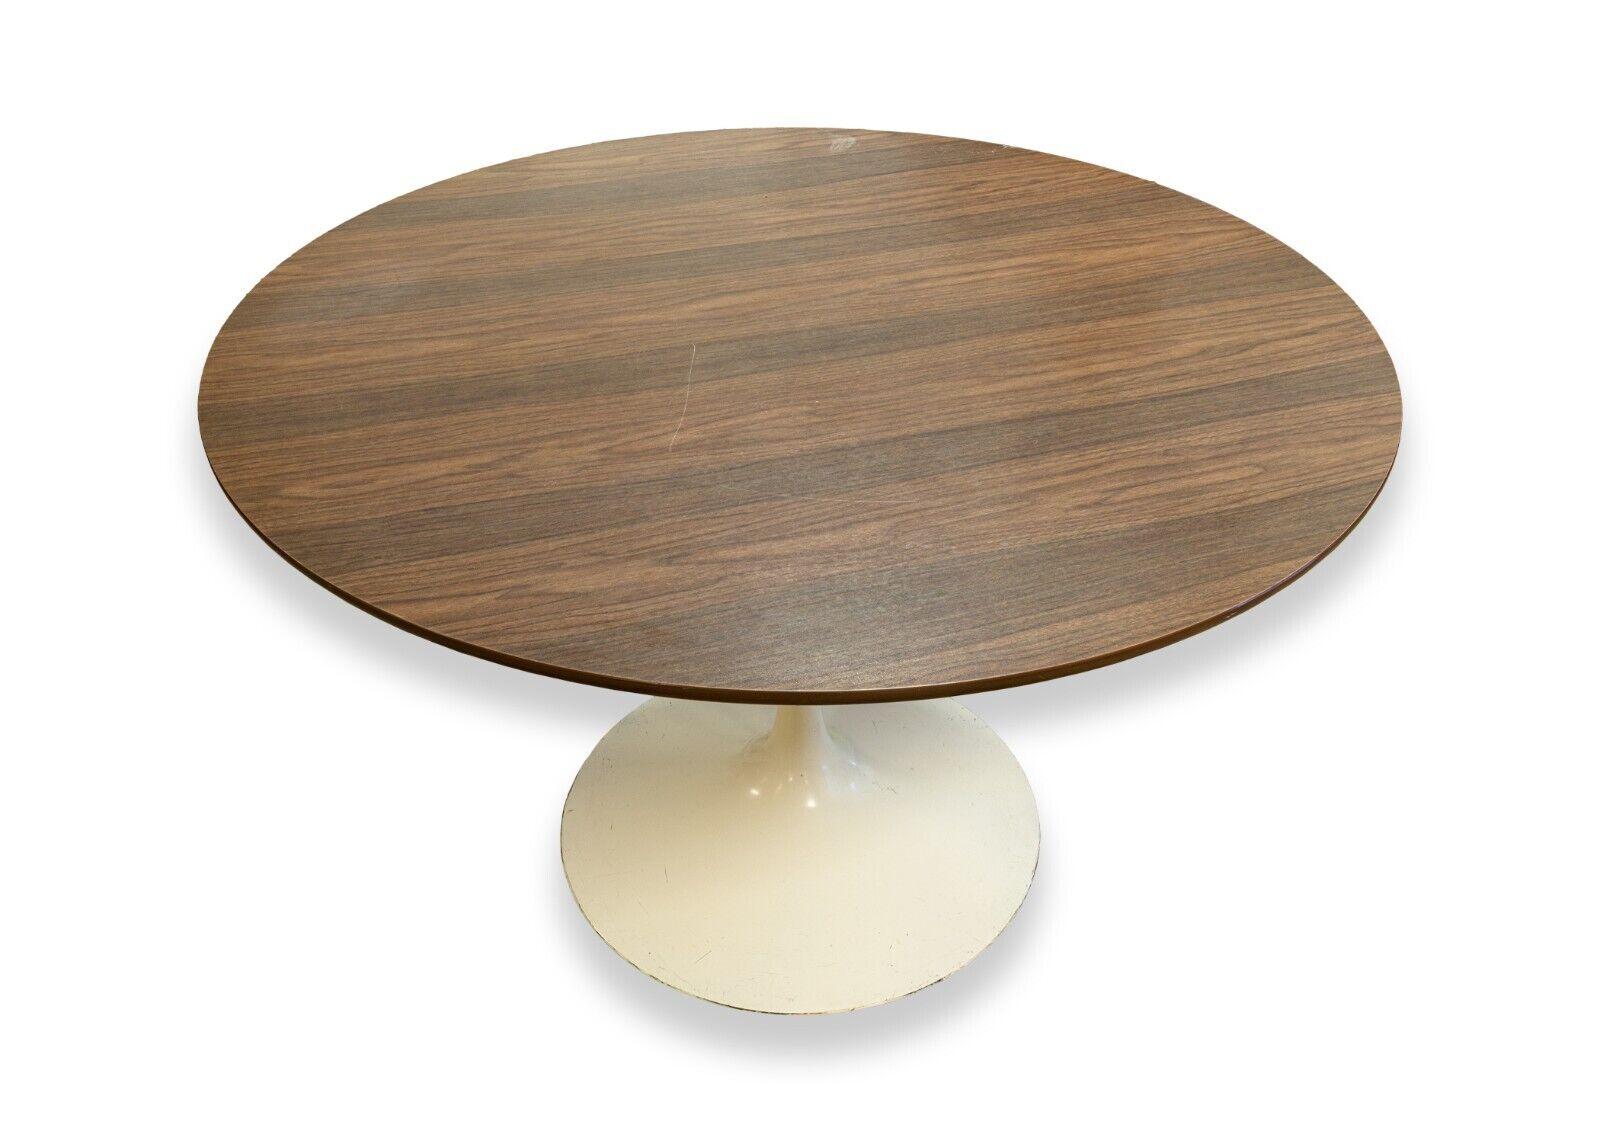 A mid century modern wood top tulip base round dinette table. A wonderful little dinette table featuring a dark wood top and a white tulip style base. This table is in good condition. Both the table top and base are scratched and scuffed a bit, but